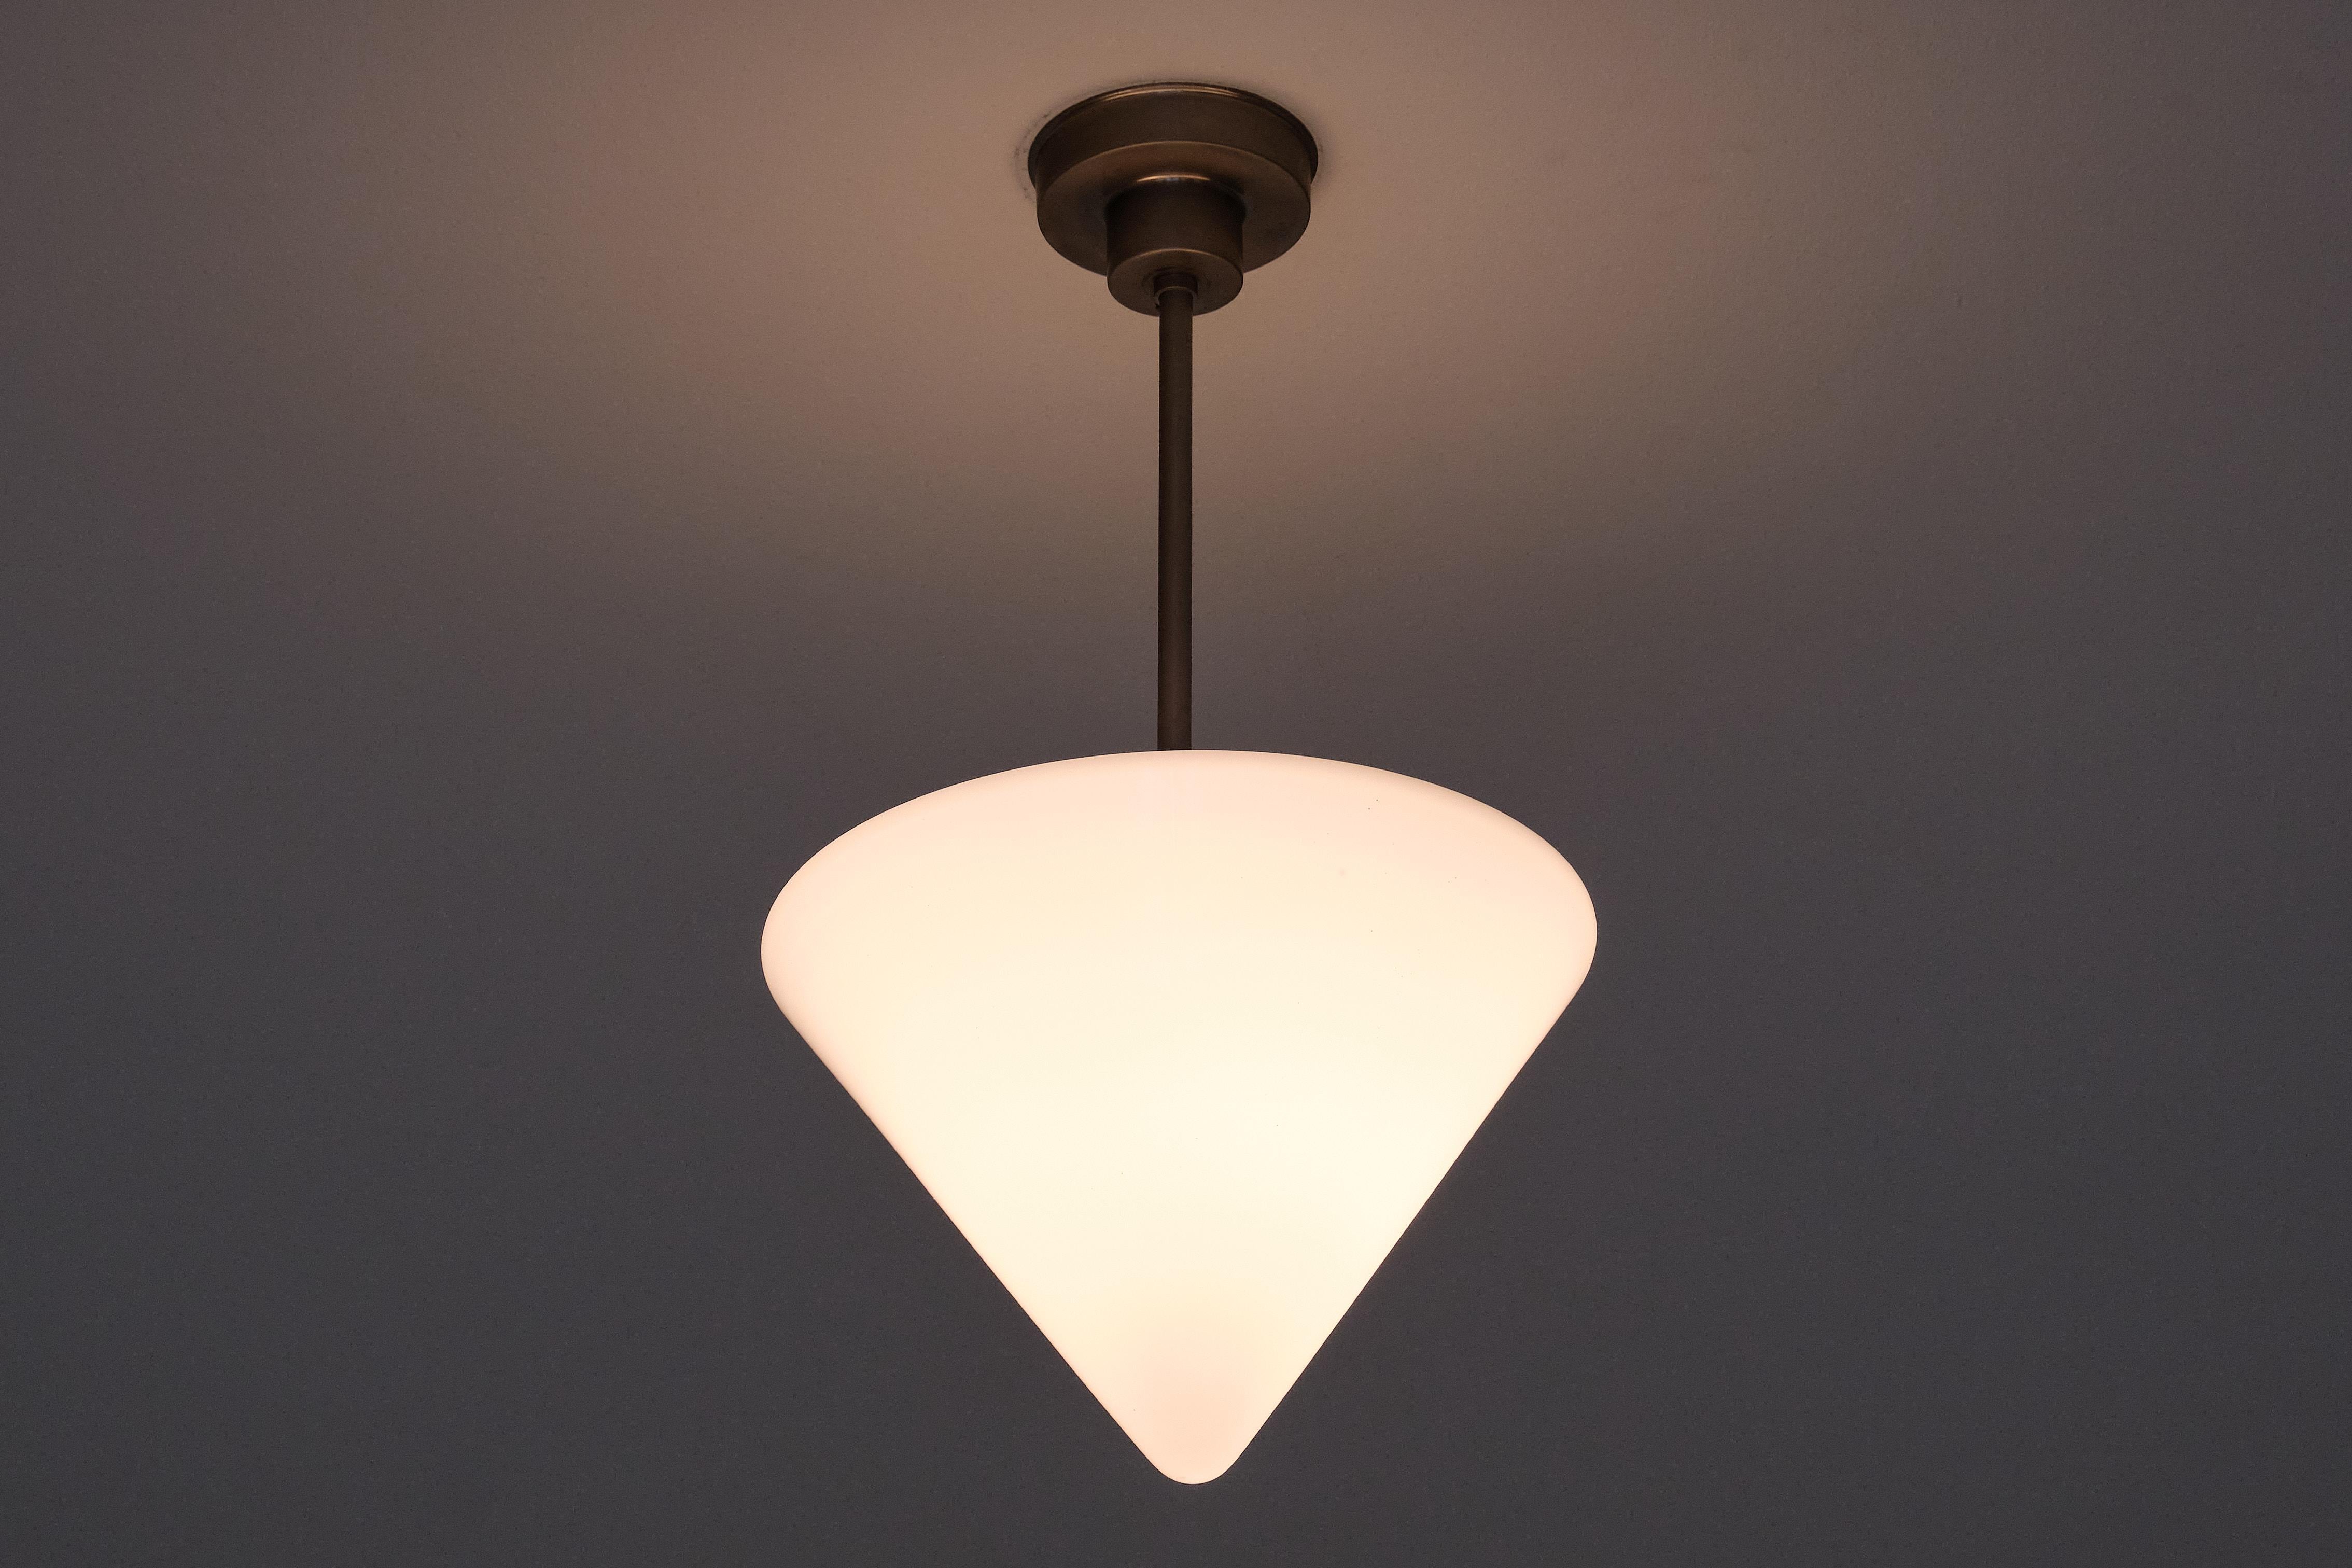 Mid-20th Century Gispen Cone Shaped Pendant Light in Opal Glass and Nickel, Netherlands, 1930s For Sale